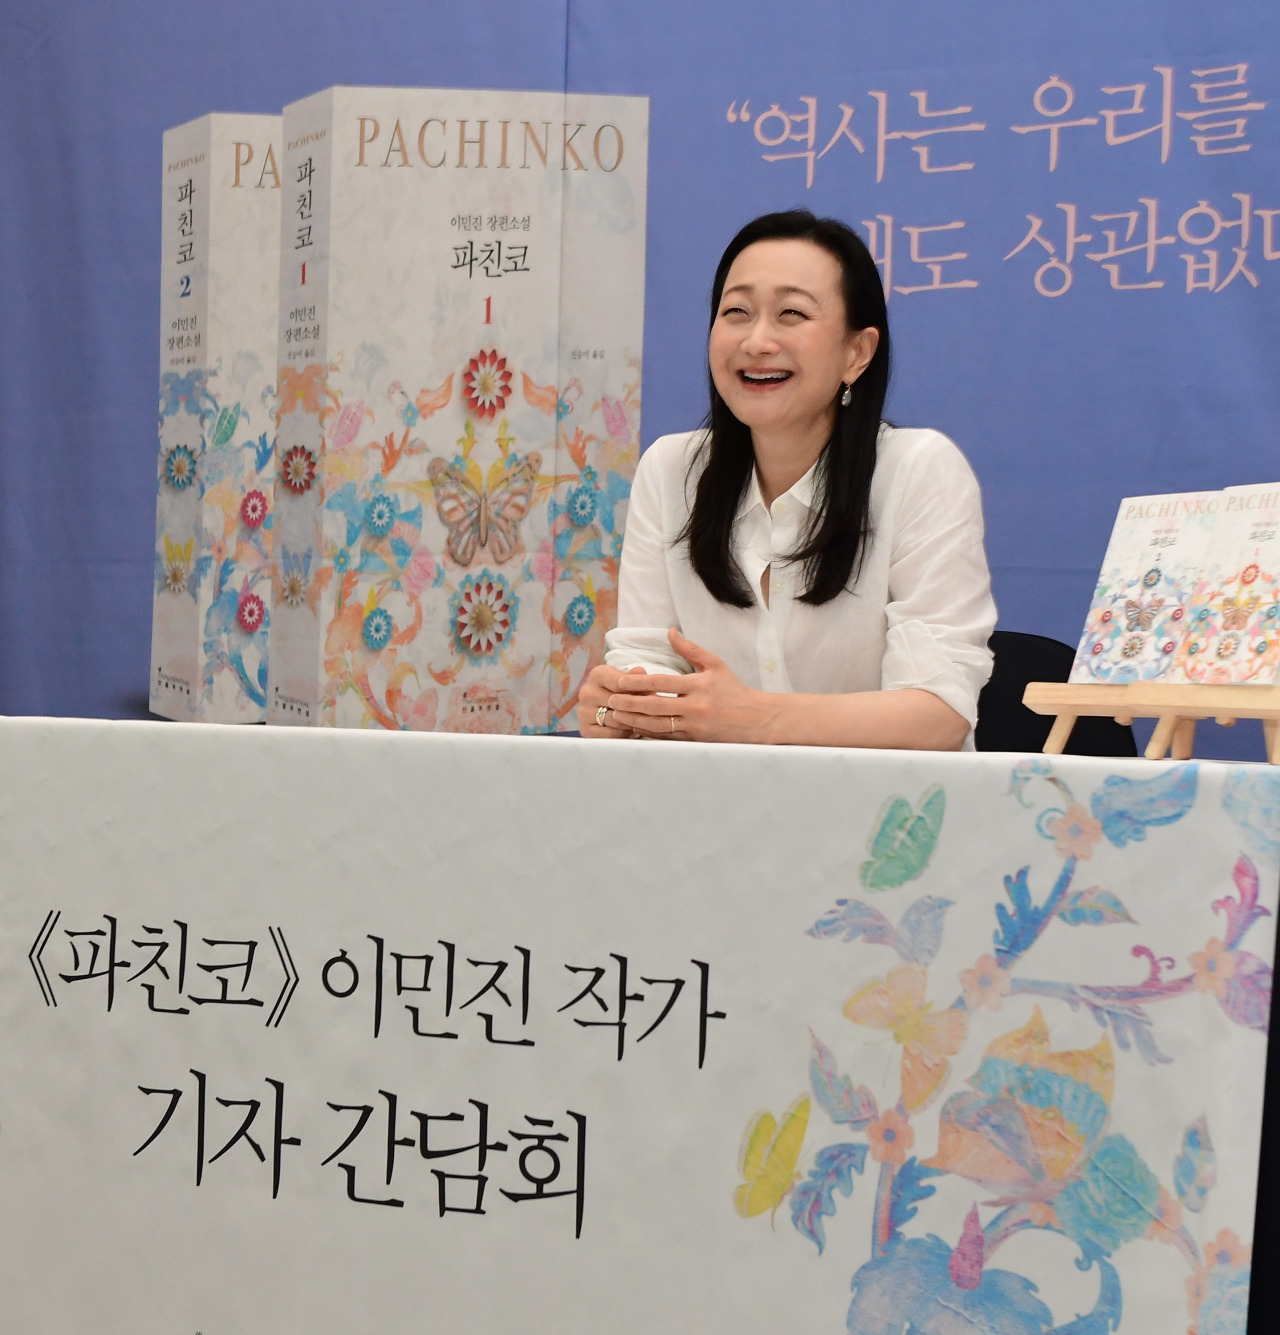 Min-jin Lee, the author of “Pachinko,” attends a press conference at the Korea Press Center in Seoul on Monday. (Influential)